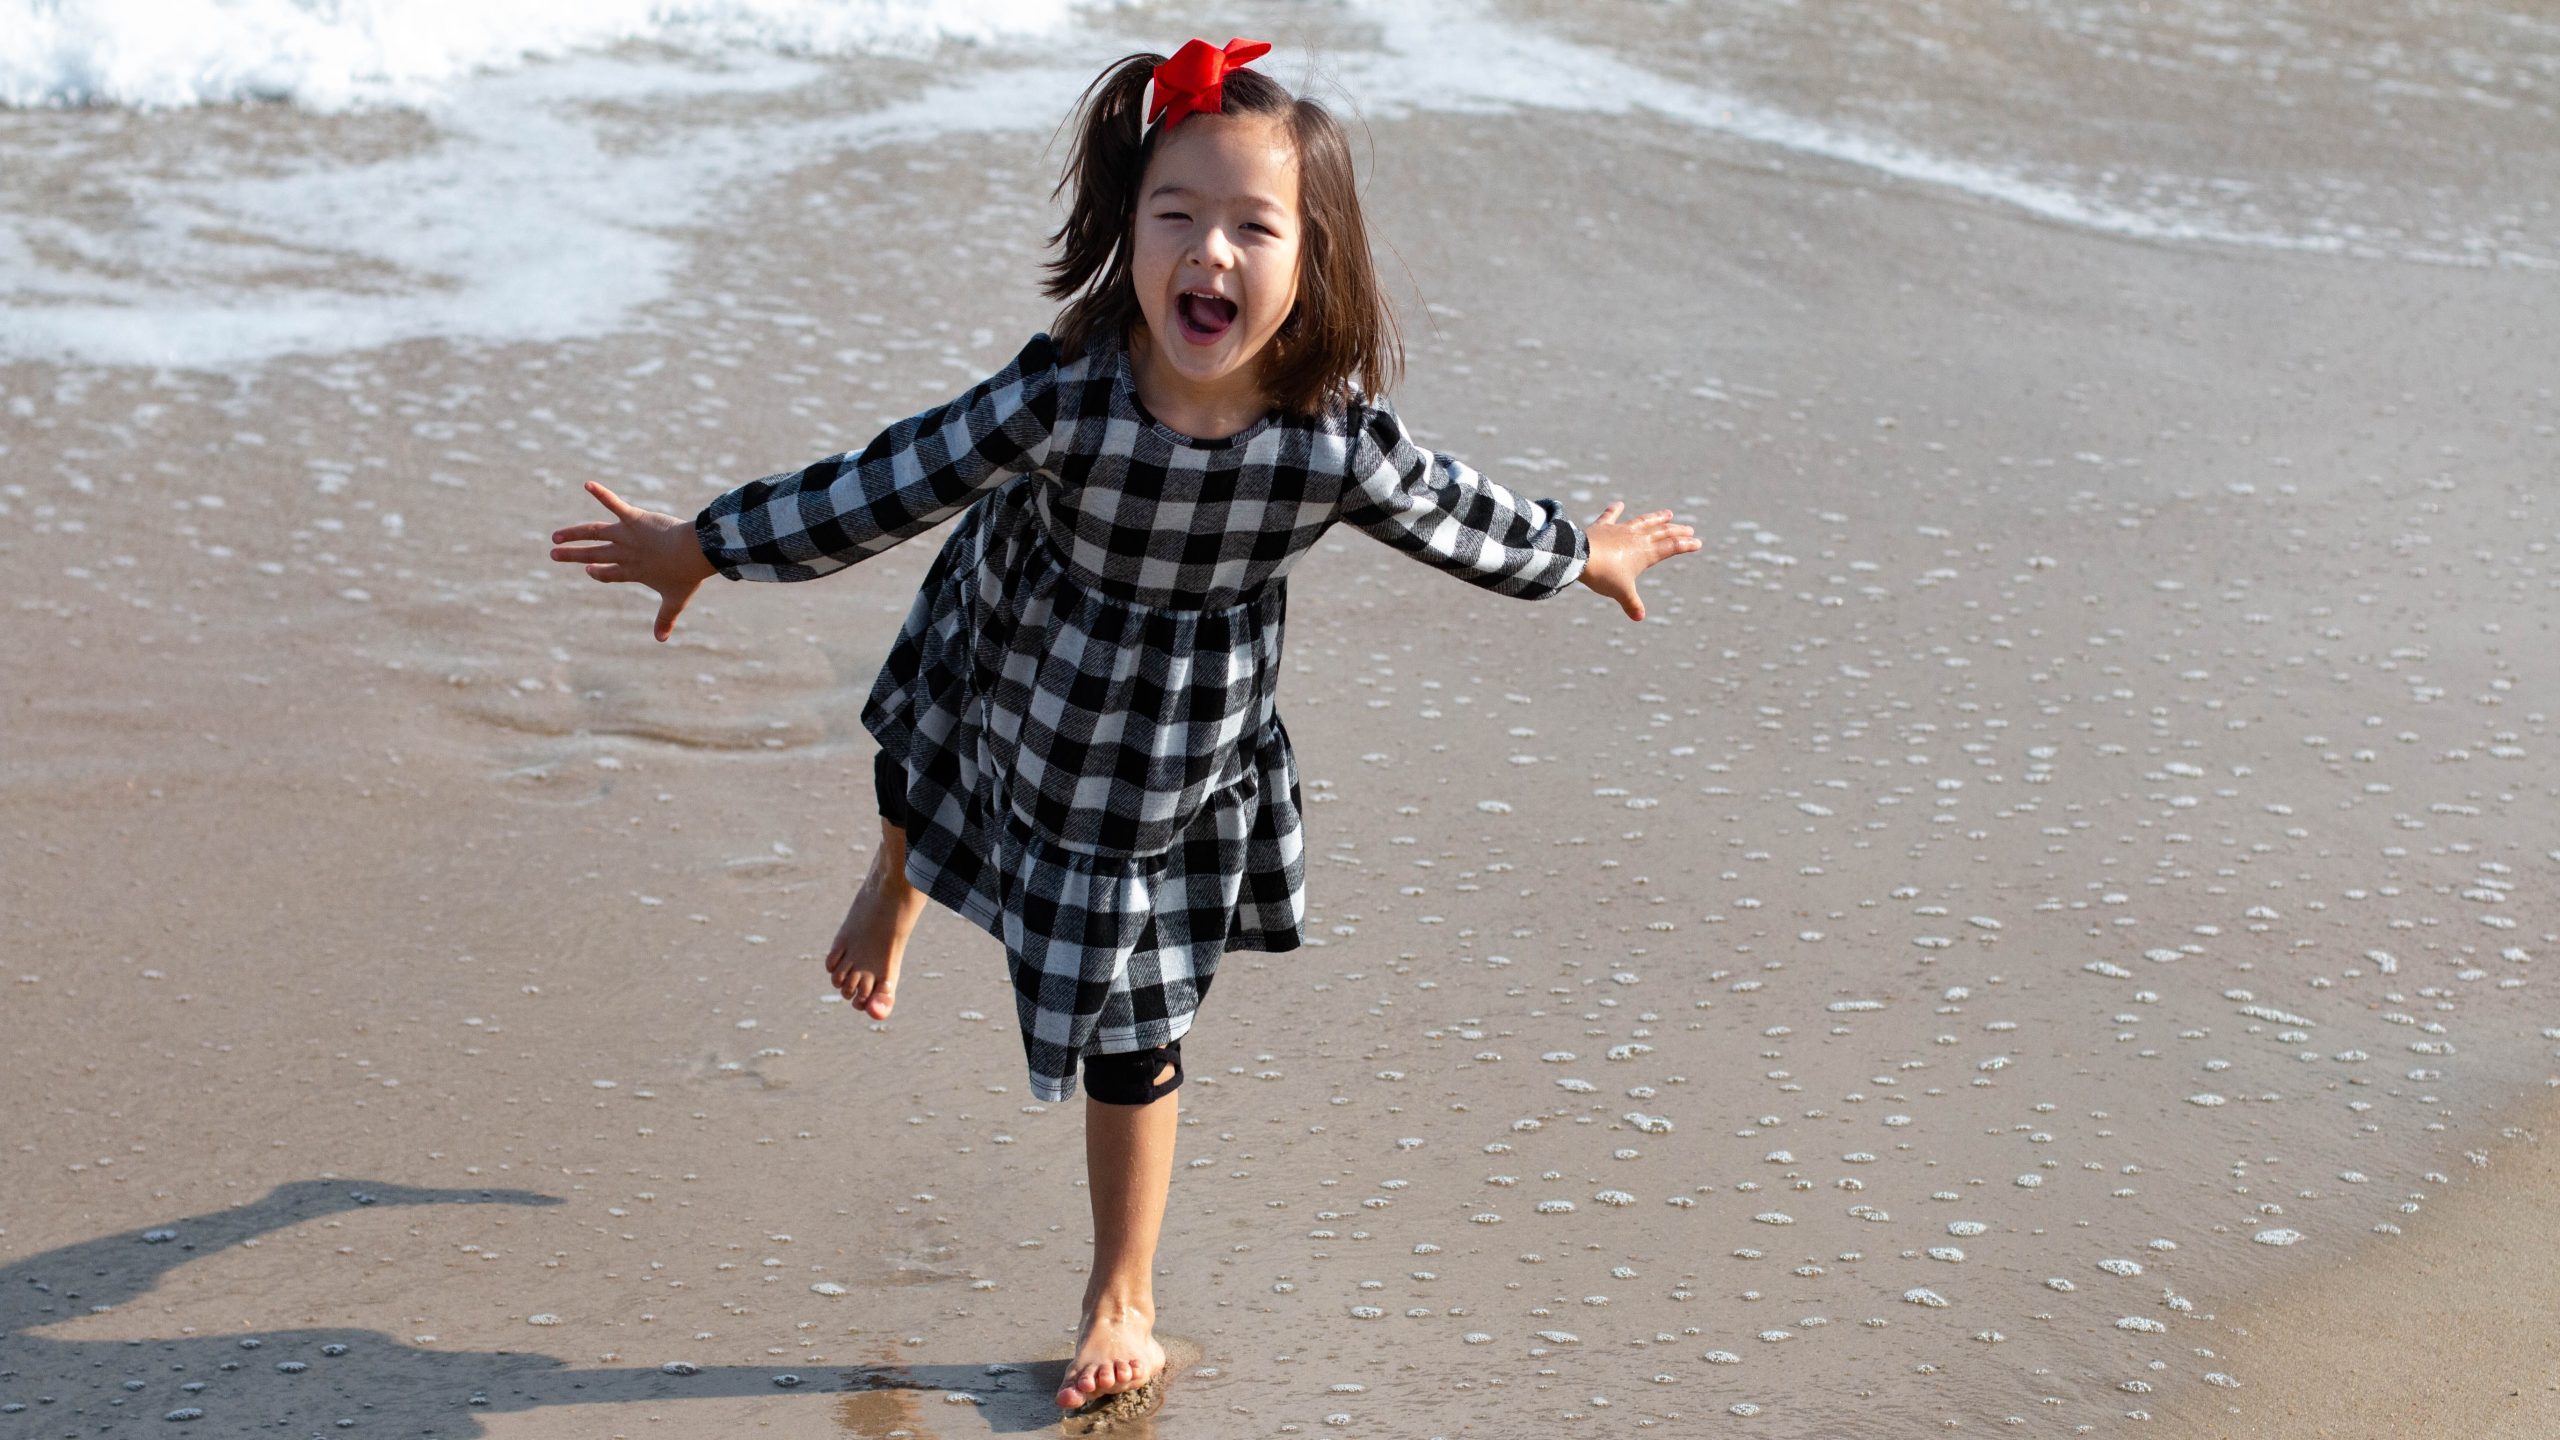 Girl in Black and White Plaid Dress on the Beach | Kids Car Donations